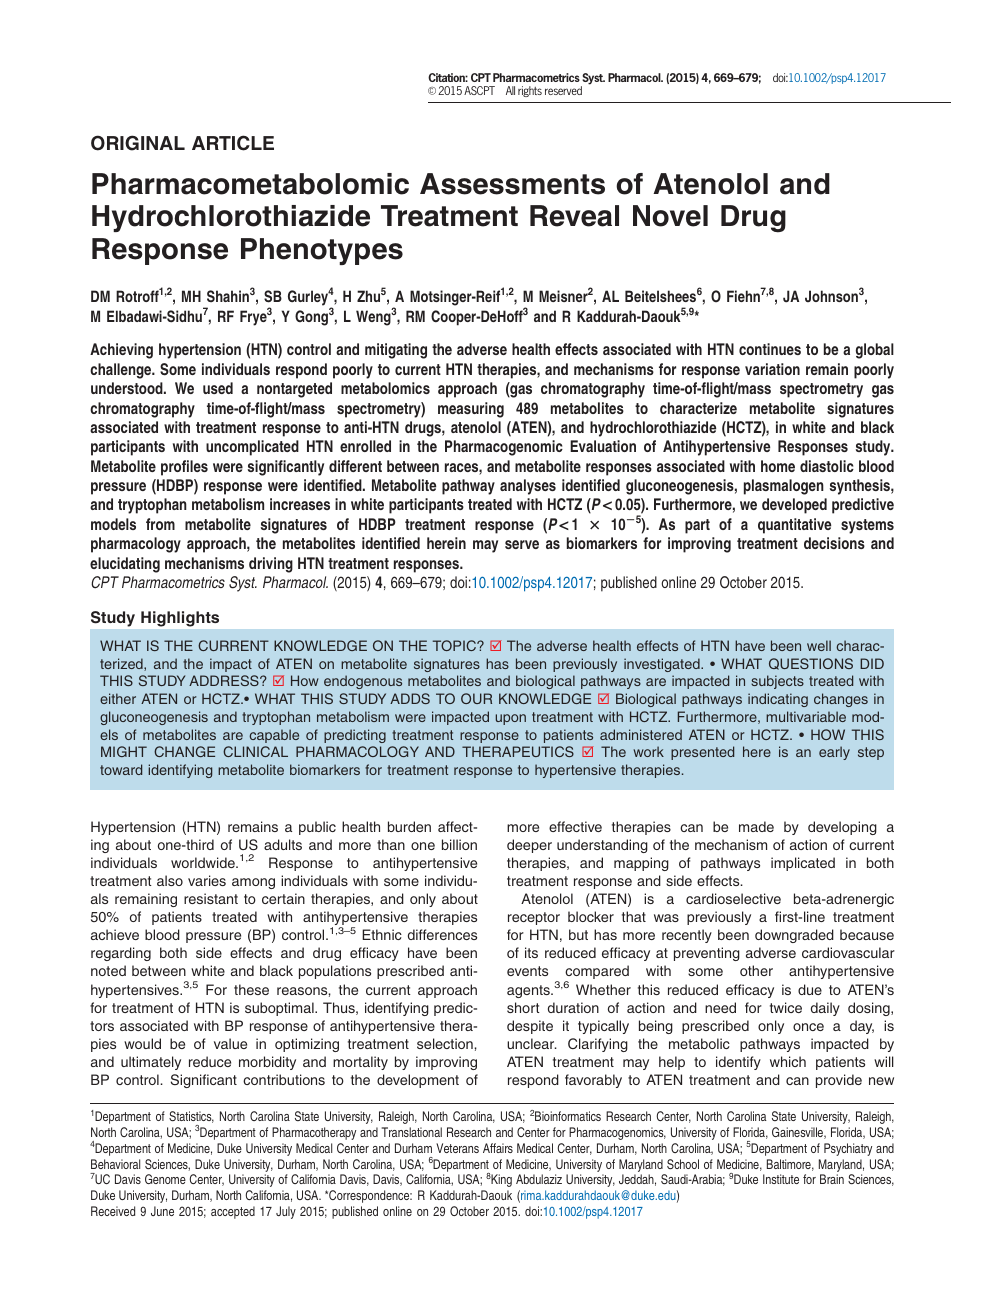 Pharmacometabolomic Assessments Of Atenolol And Hydrochlorothiazide Treatment Reveal Novel Drug Response Phenotypes Topic Of Research Paper In Clinical Medicine Download Scholarly Article Pdf And Read For Free On Cyberleninka Open Science